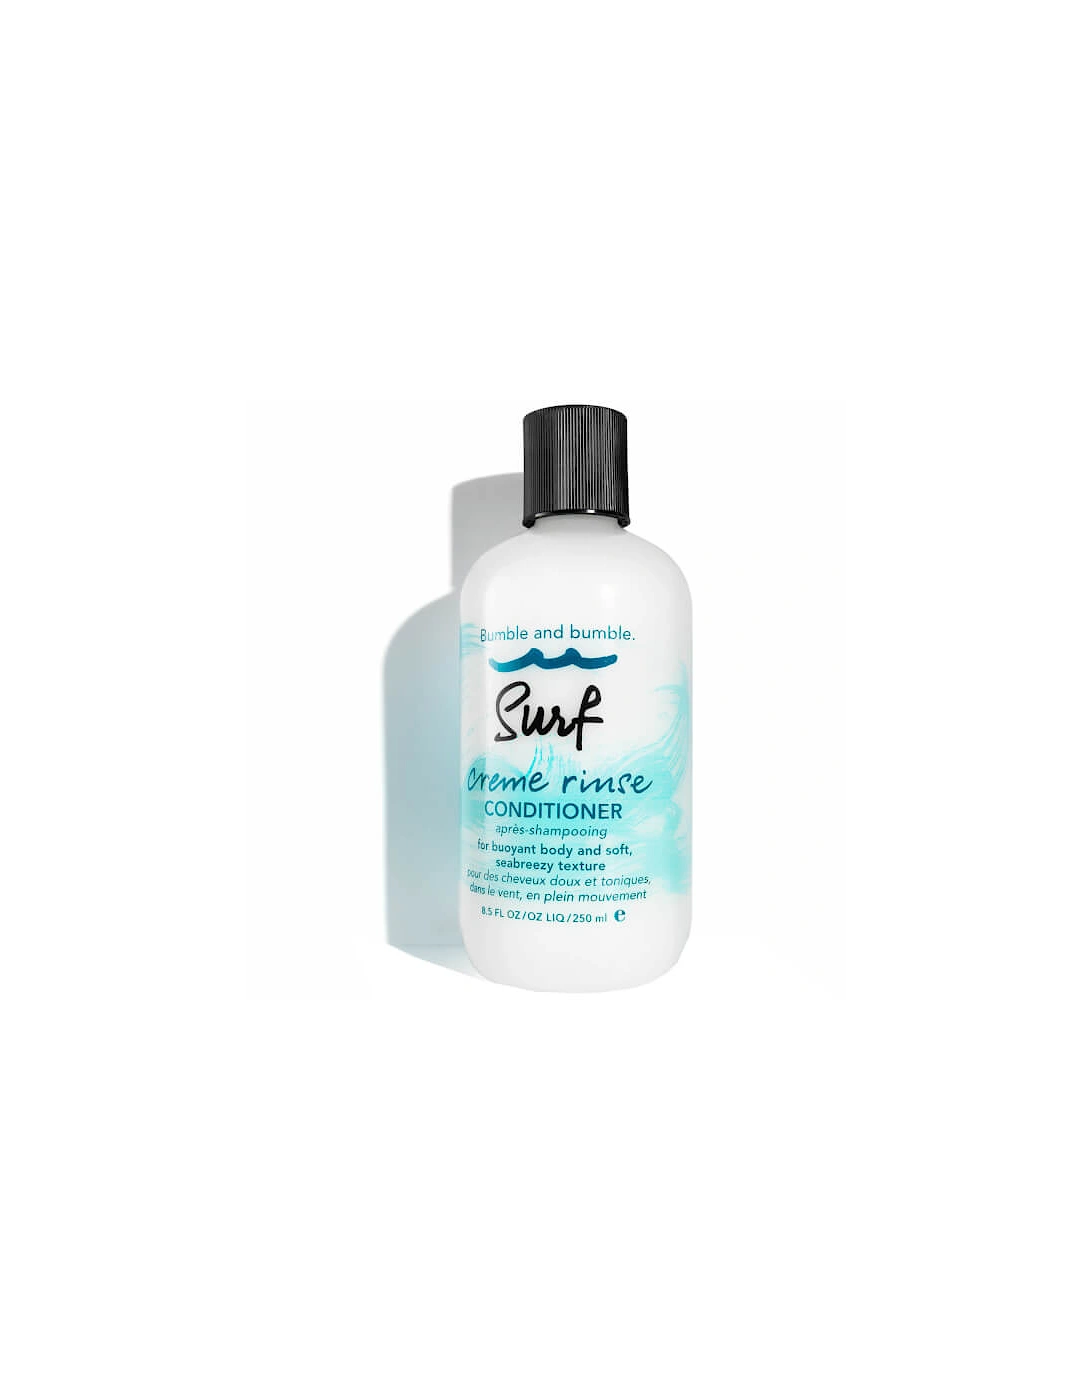 Bumble and bumble Surf Crème Rinse Conditioner 250ml - Bumble and bumble, 2 of 1